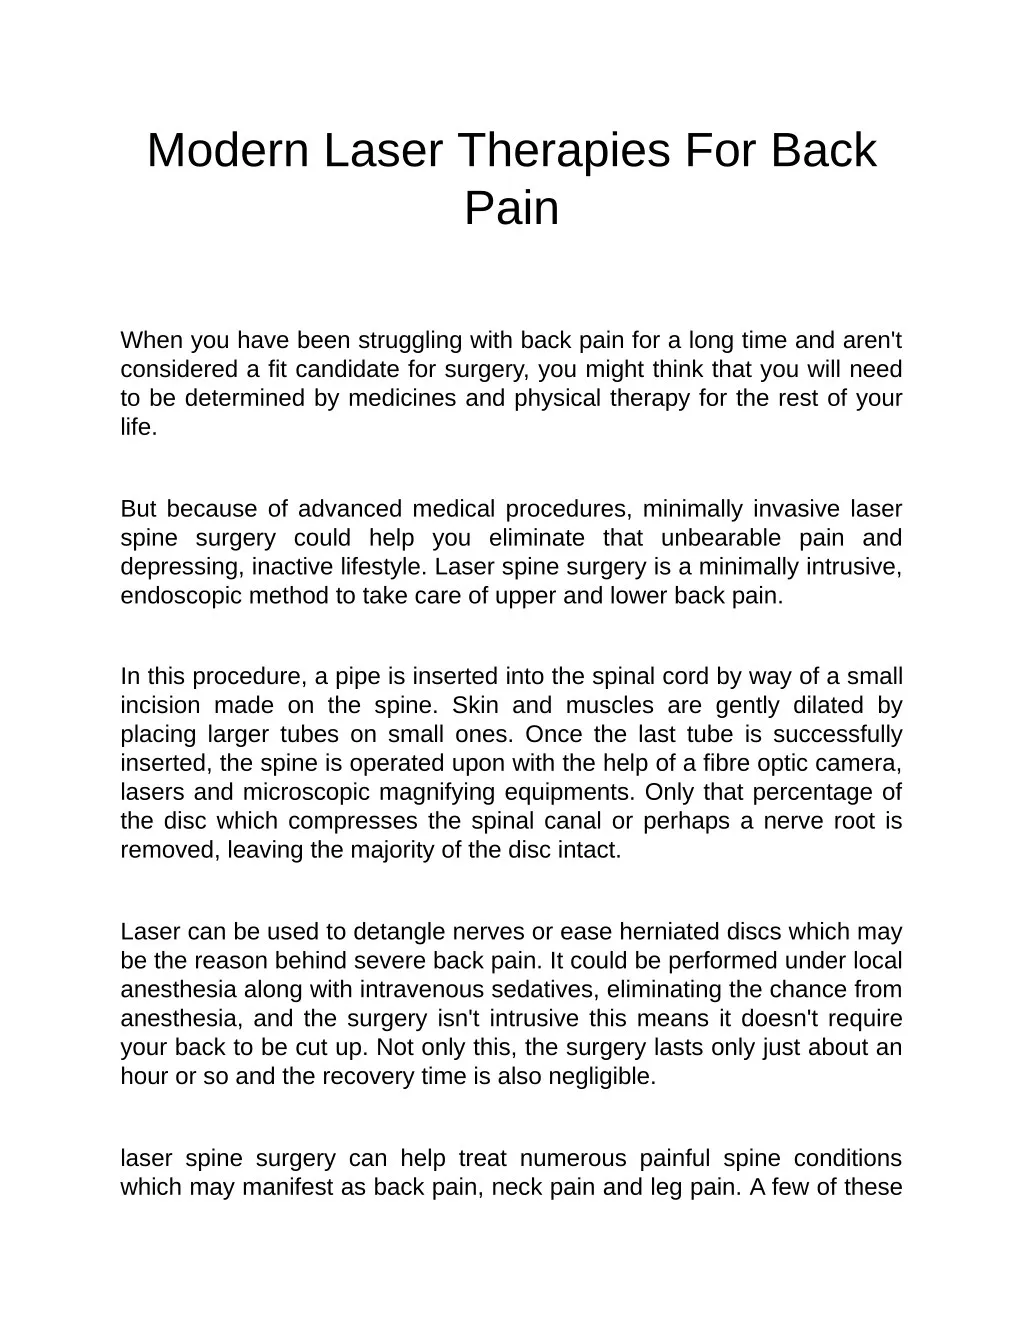 modern laser therapies for back pain